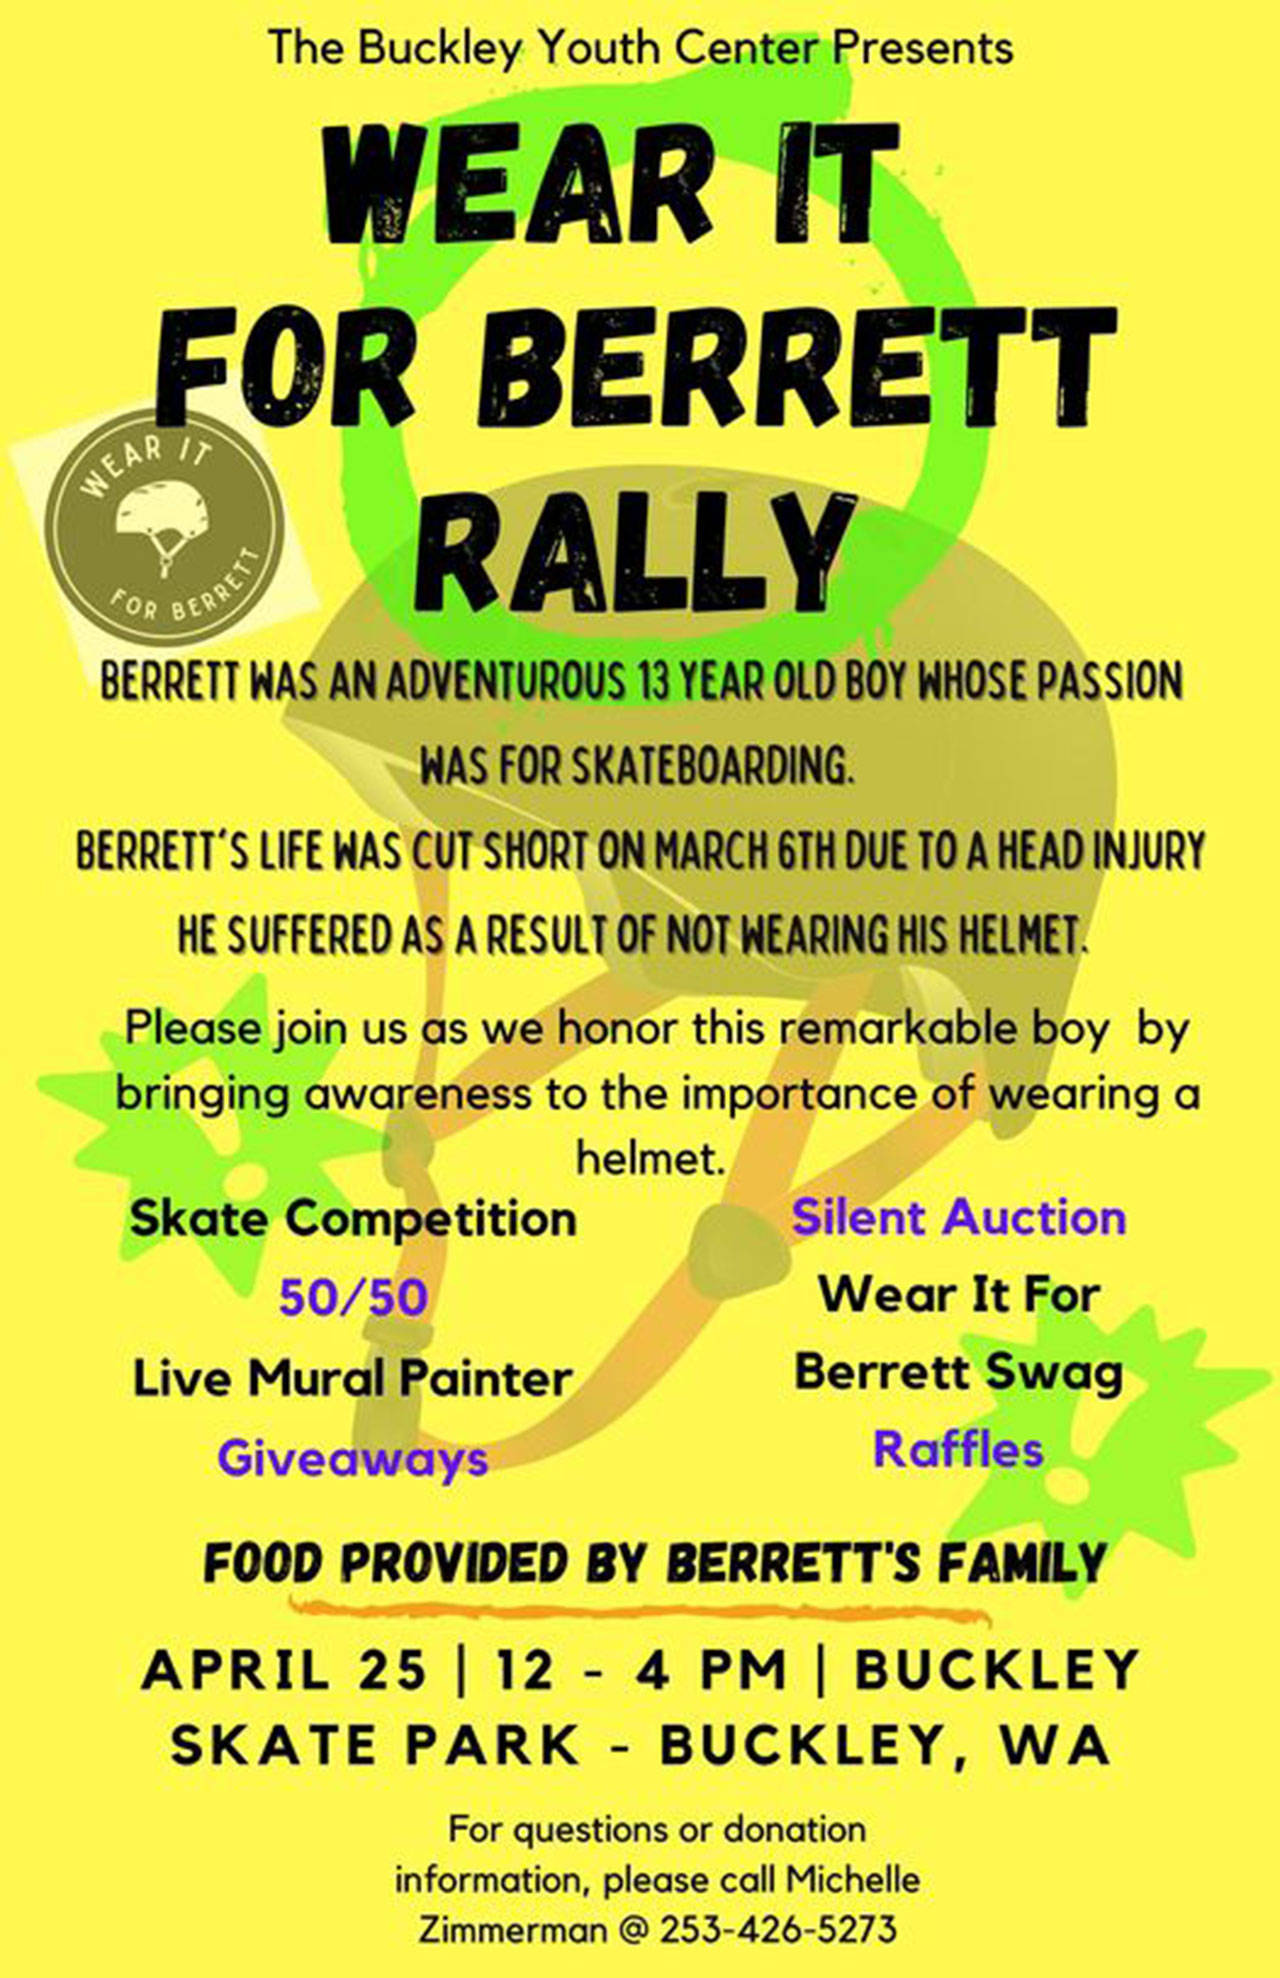 This is the full poster advertising information on the April 25th rally.